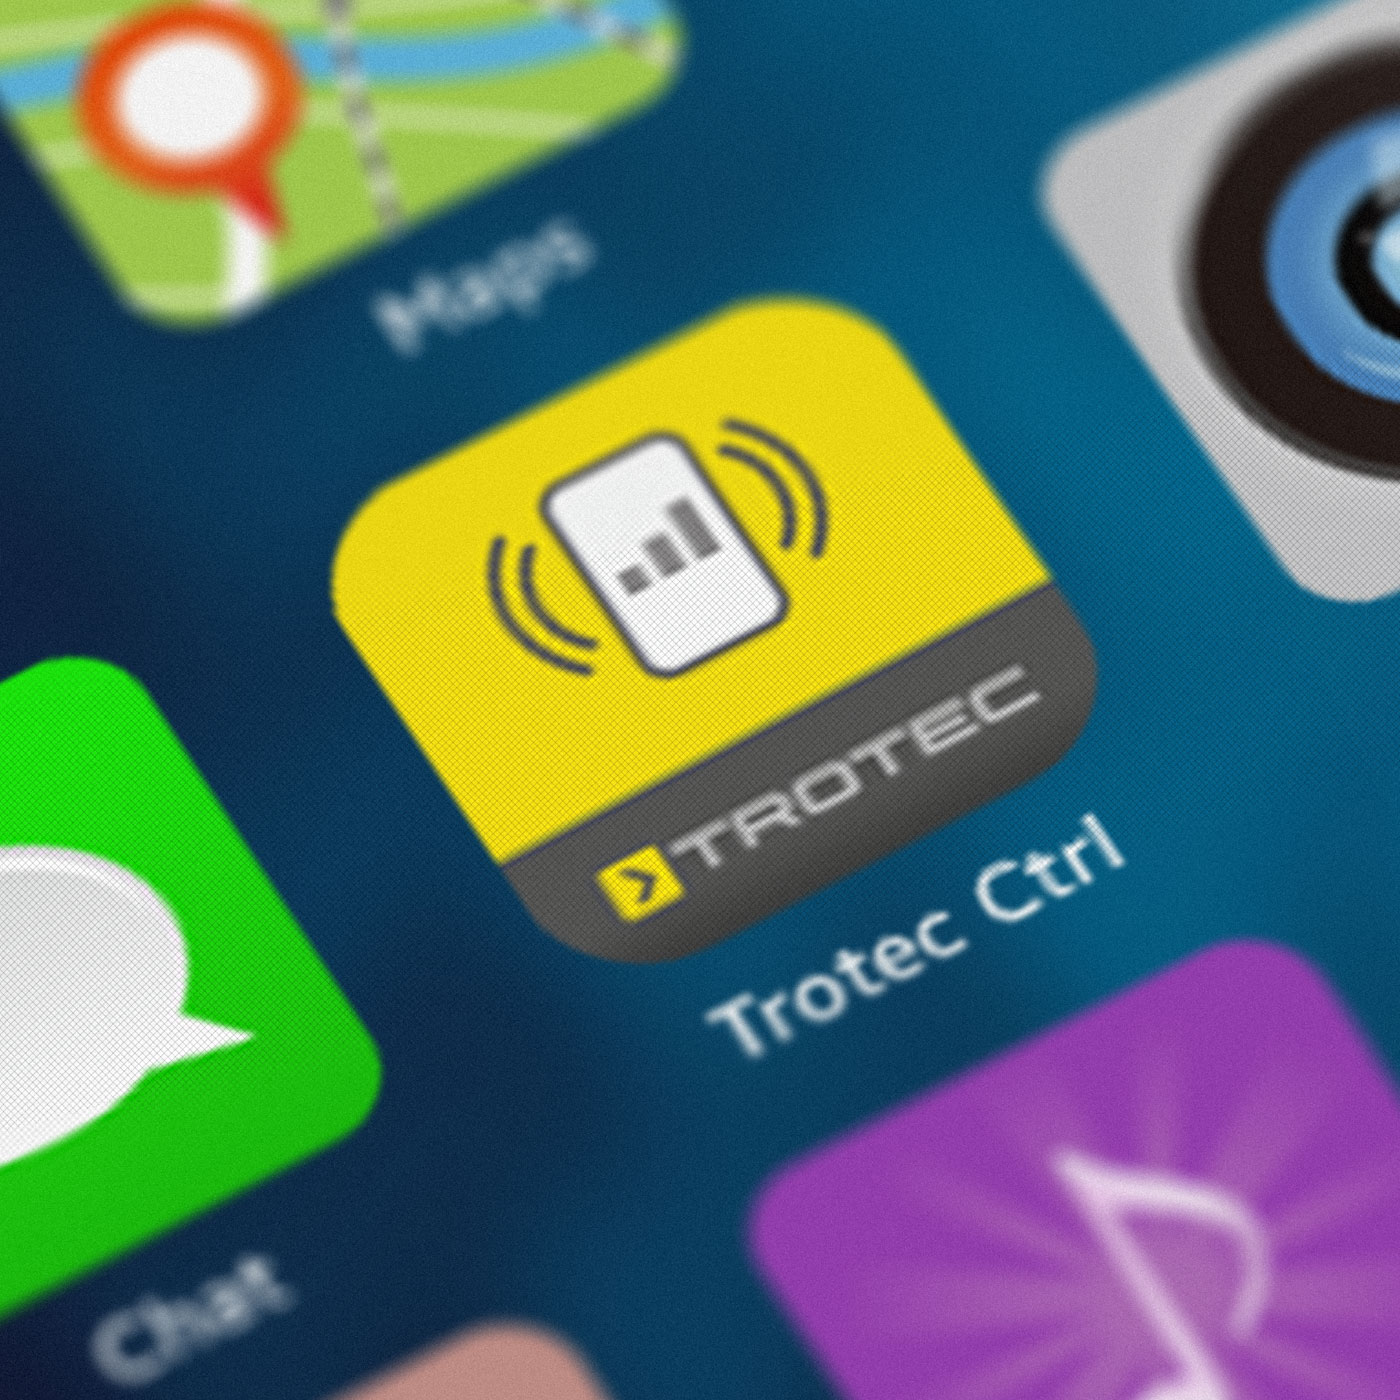 The Trotec Control app is available free of charge for Android and iOS